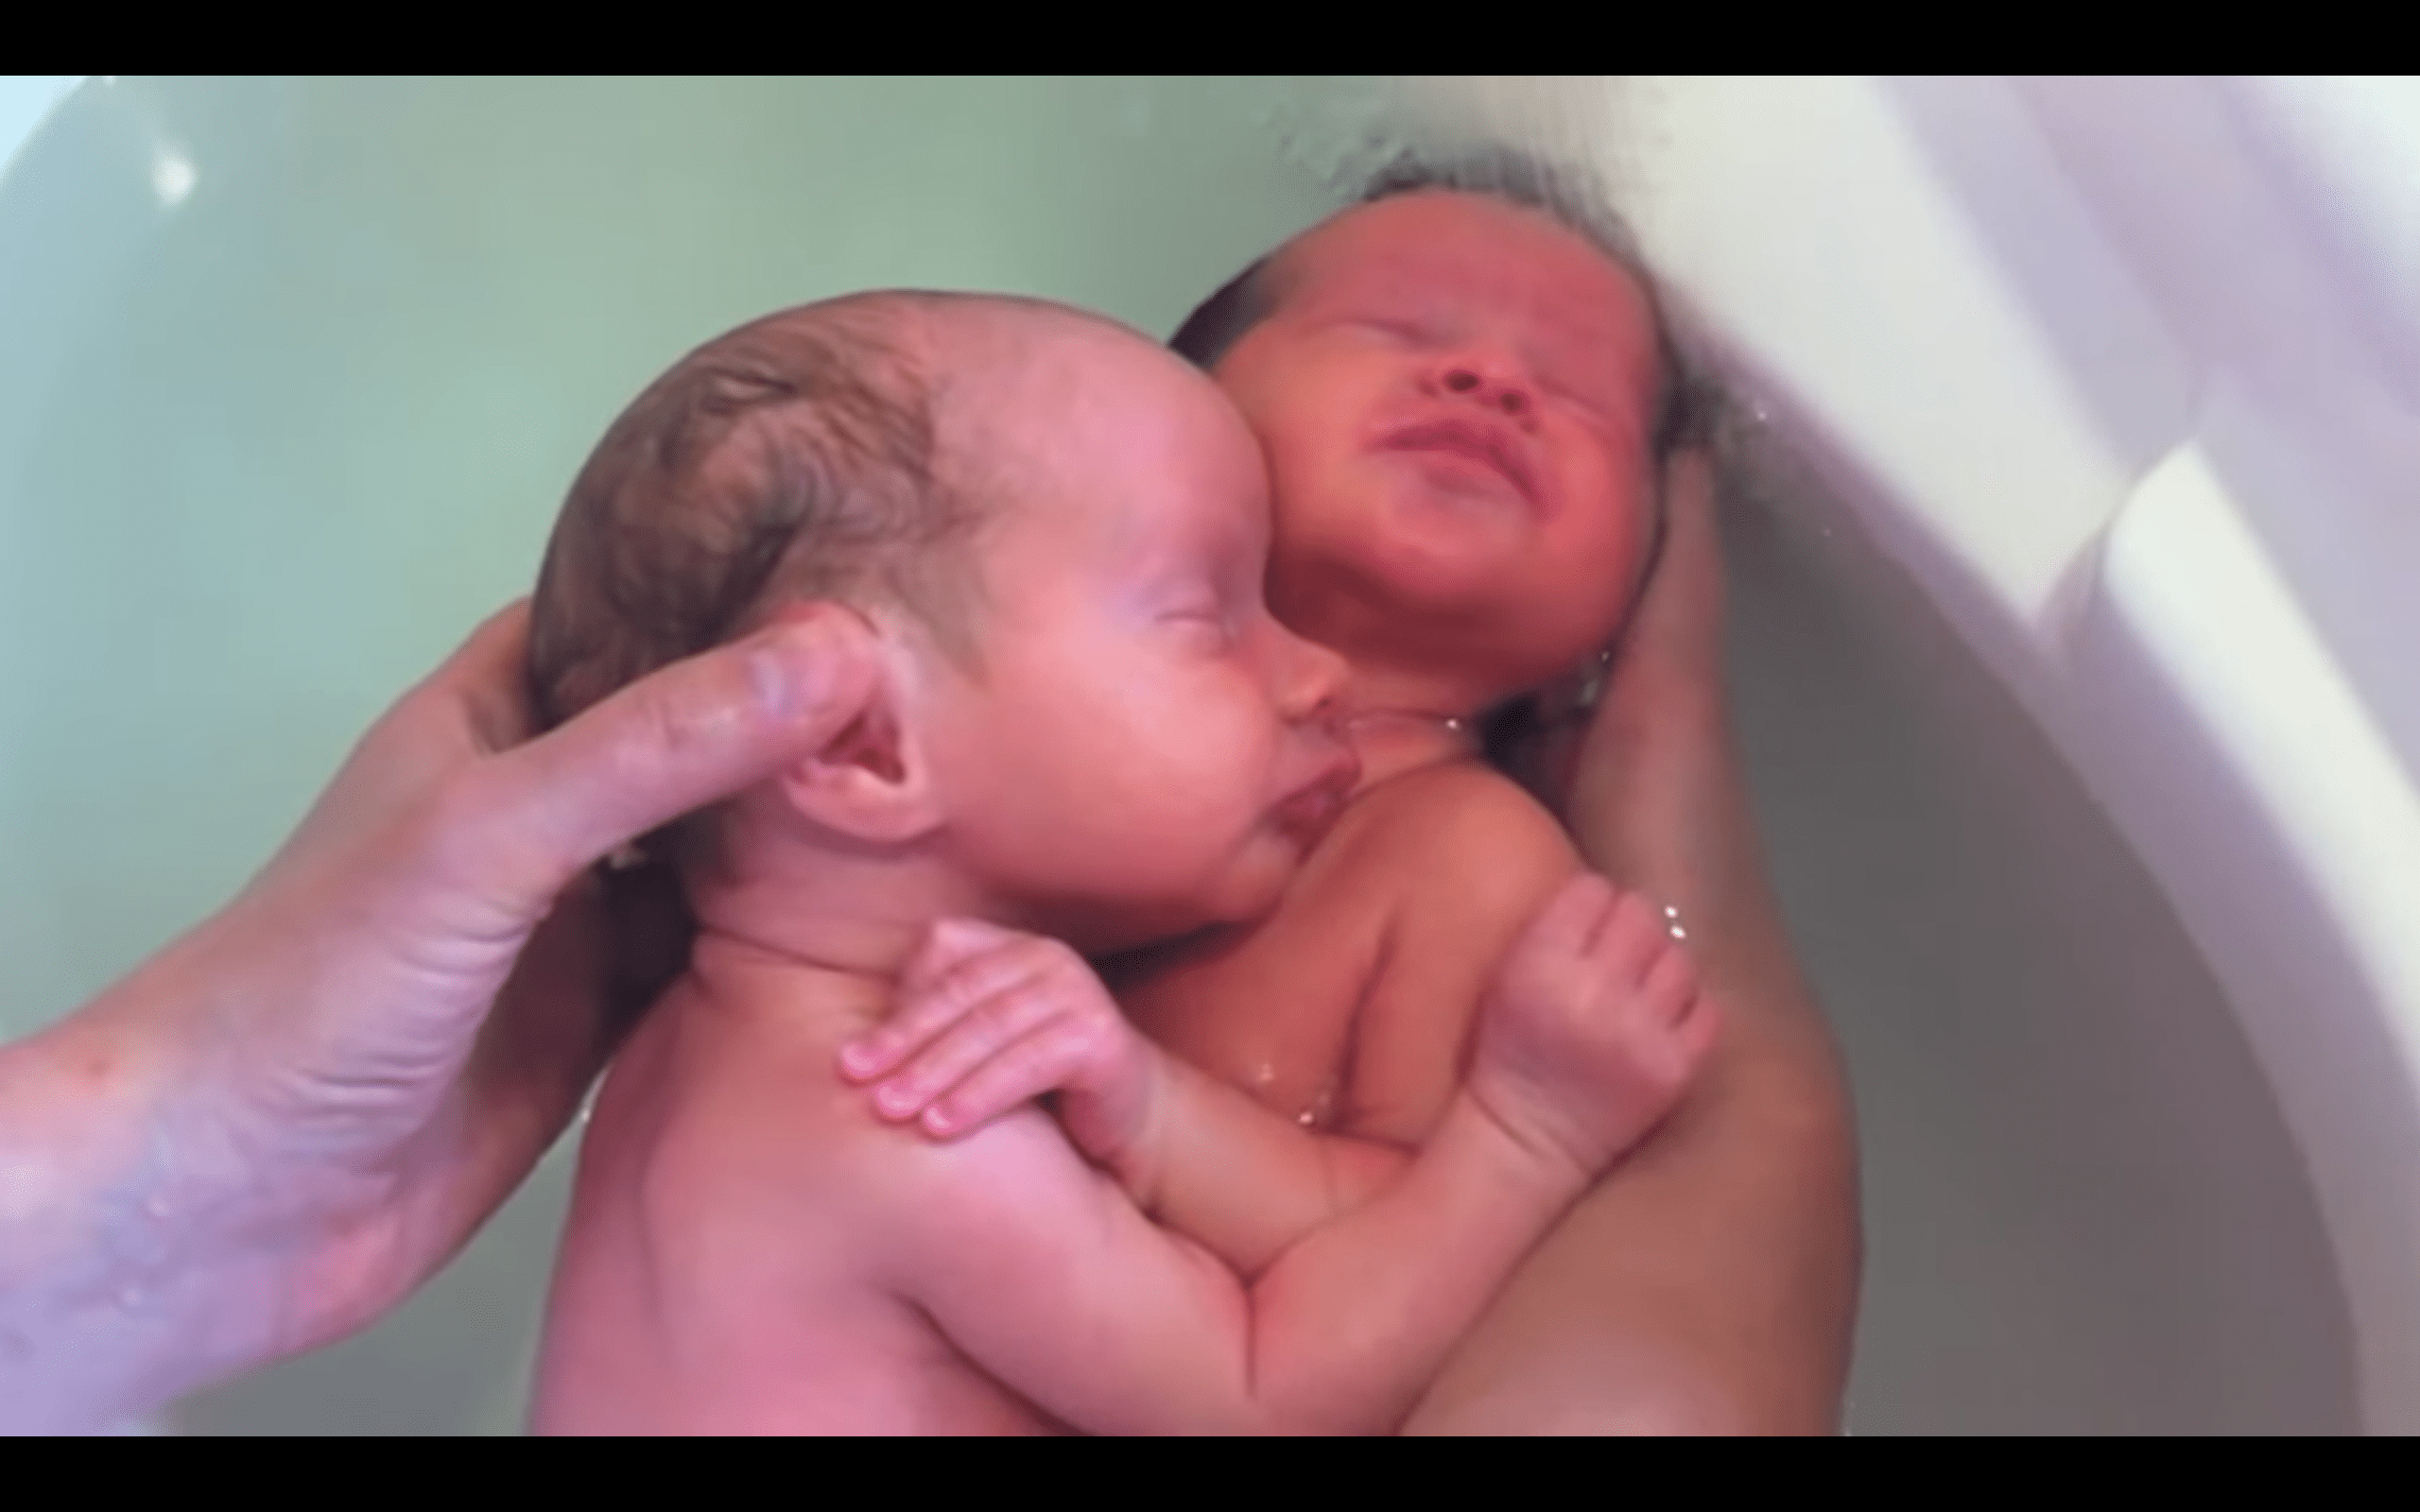 Twin babies holding on to each other in a video shared by a nurse bathing them. | Photo: youtube.com/massagebebe